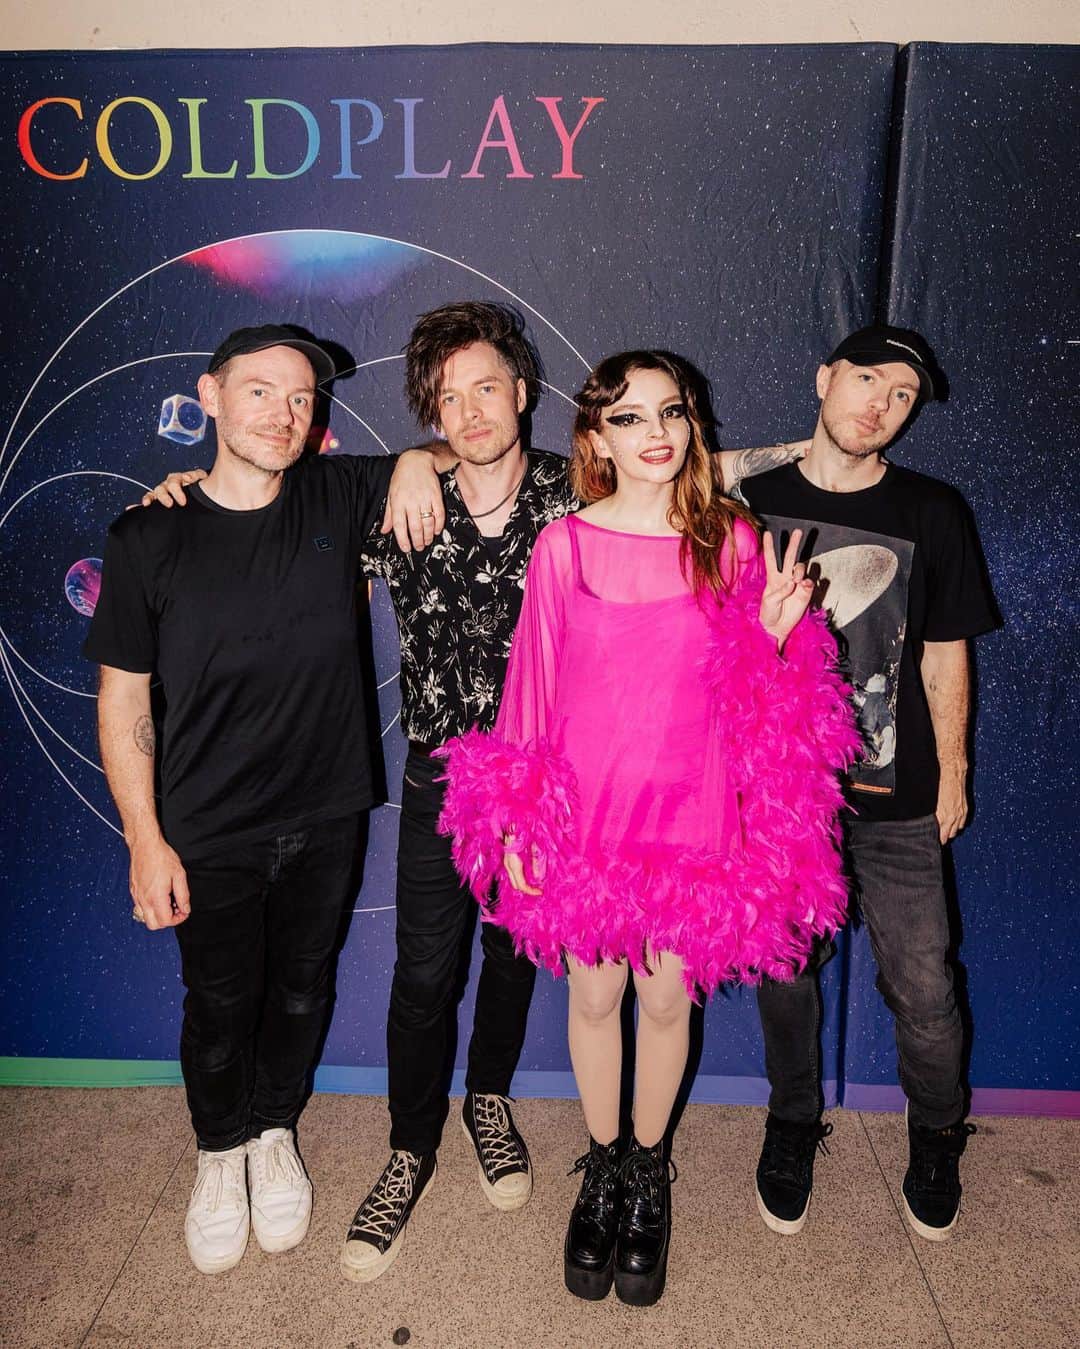 CHVRCHESのインスタグラム：「Excited to announce we'll be back on tour with @Coldplay for select dates in the UK and Europe this summer! See the full list of summer CHV dates at chvrch.es  📸 @annaleemedia」